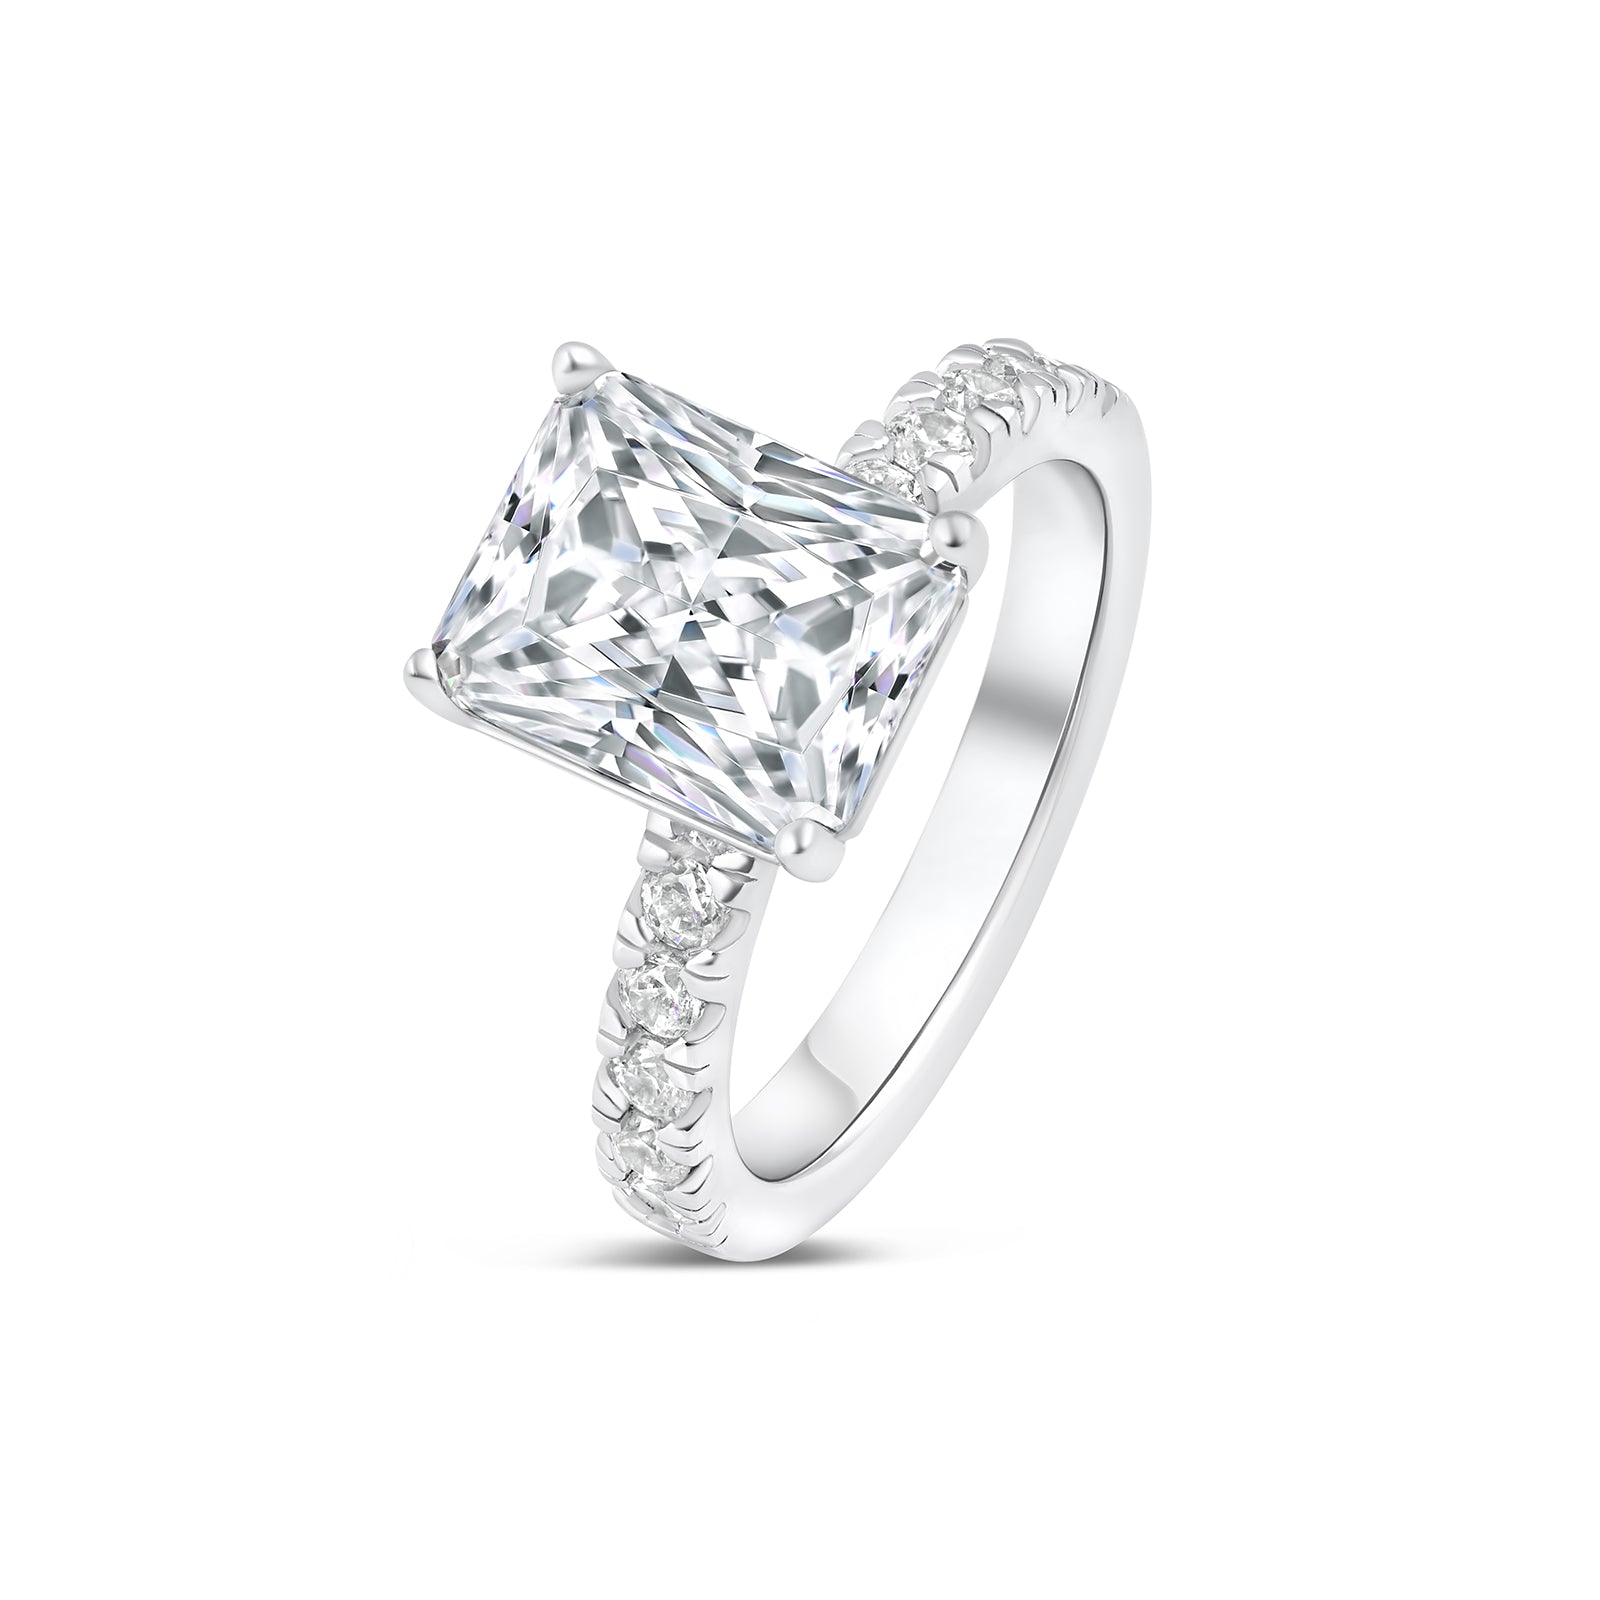 Classic 3.75 carat radiant cut engagement ring with half eternity band detailing tilted to its side